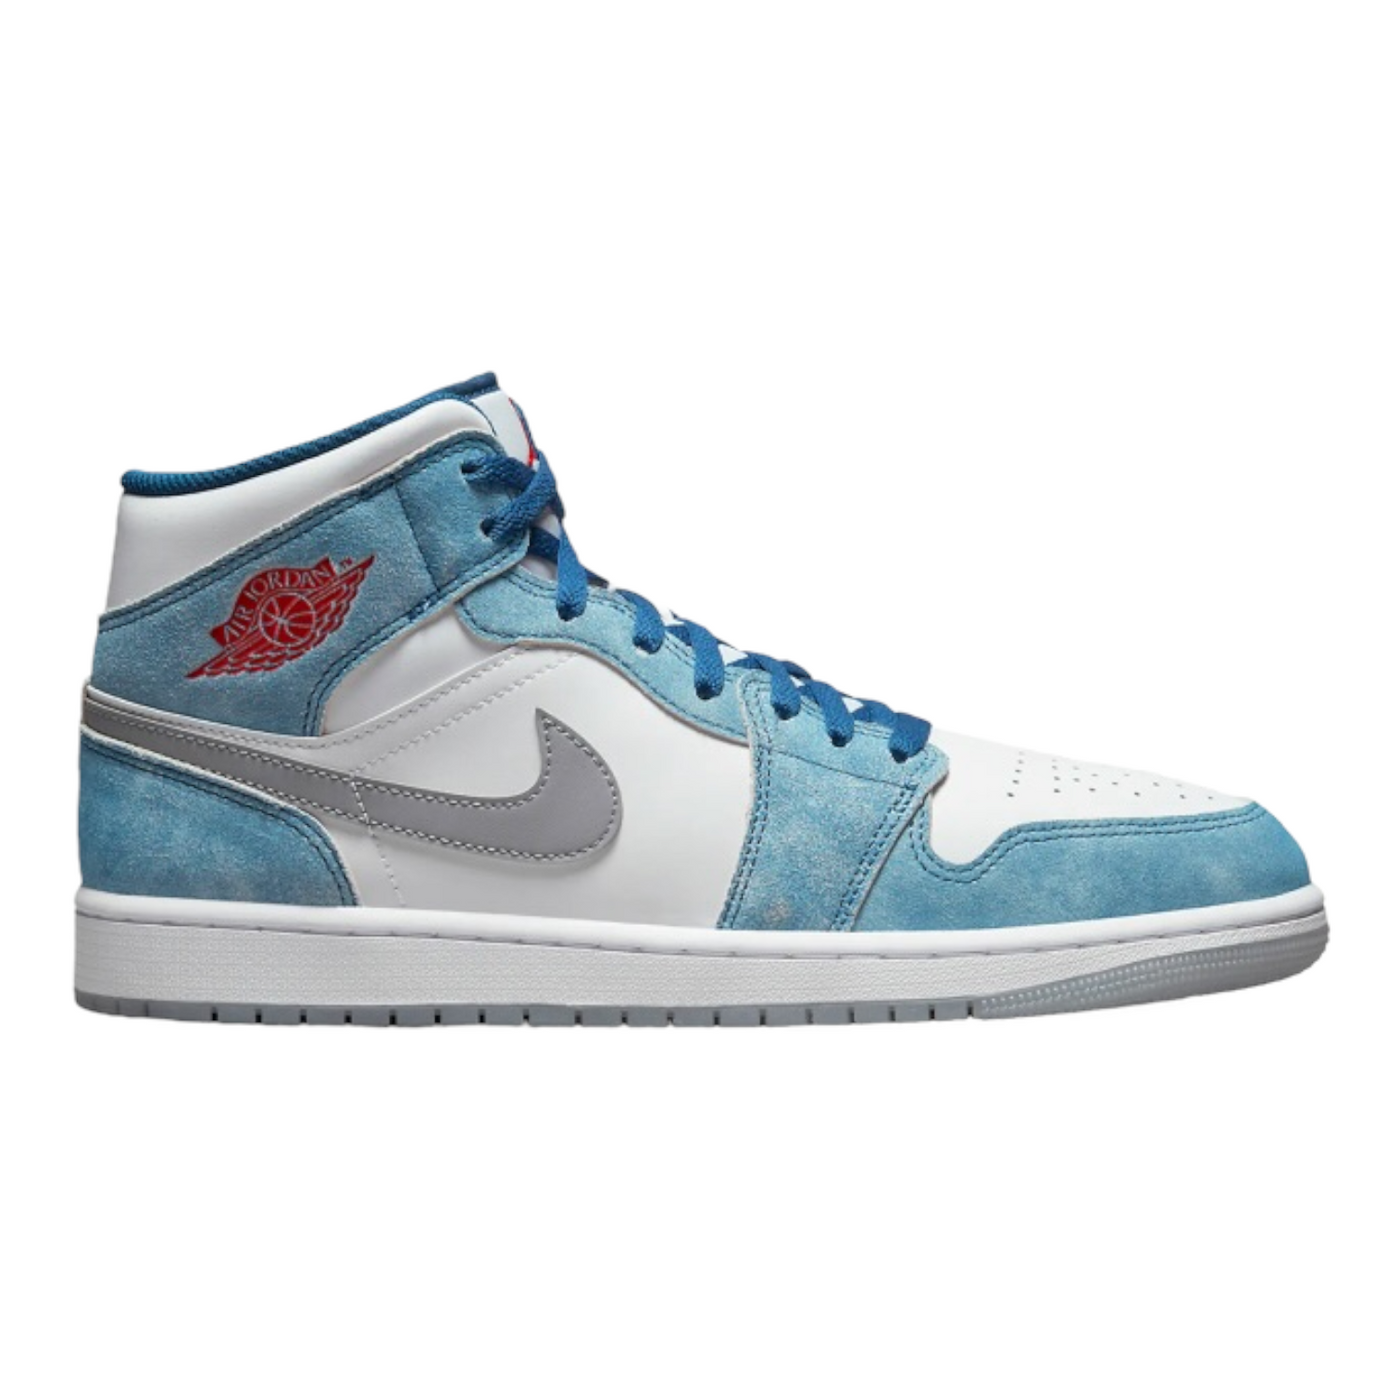 NIKE AIR JORDAN 1 MID SE FRENCH BLUE FIRE RED